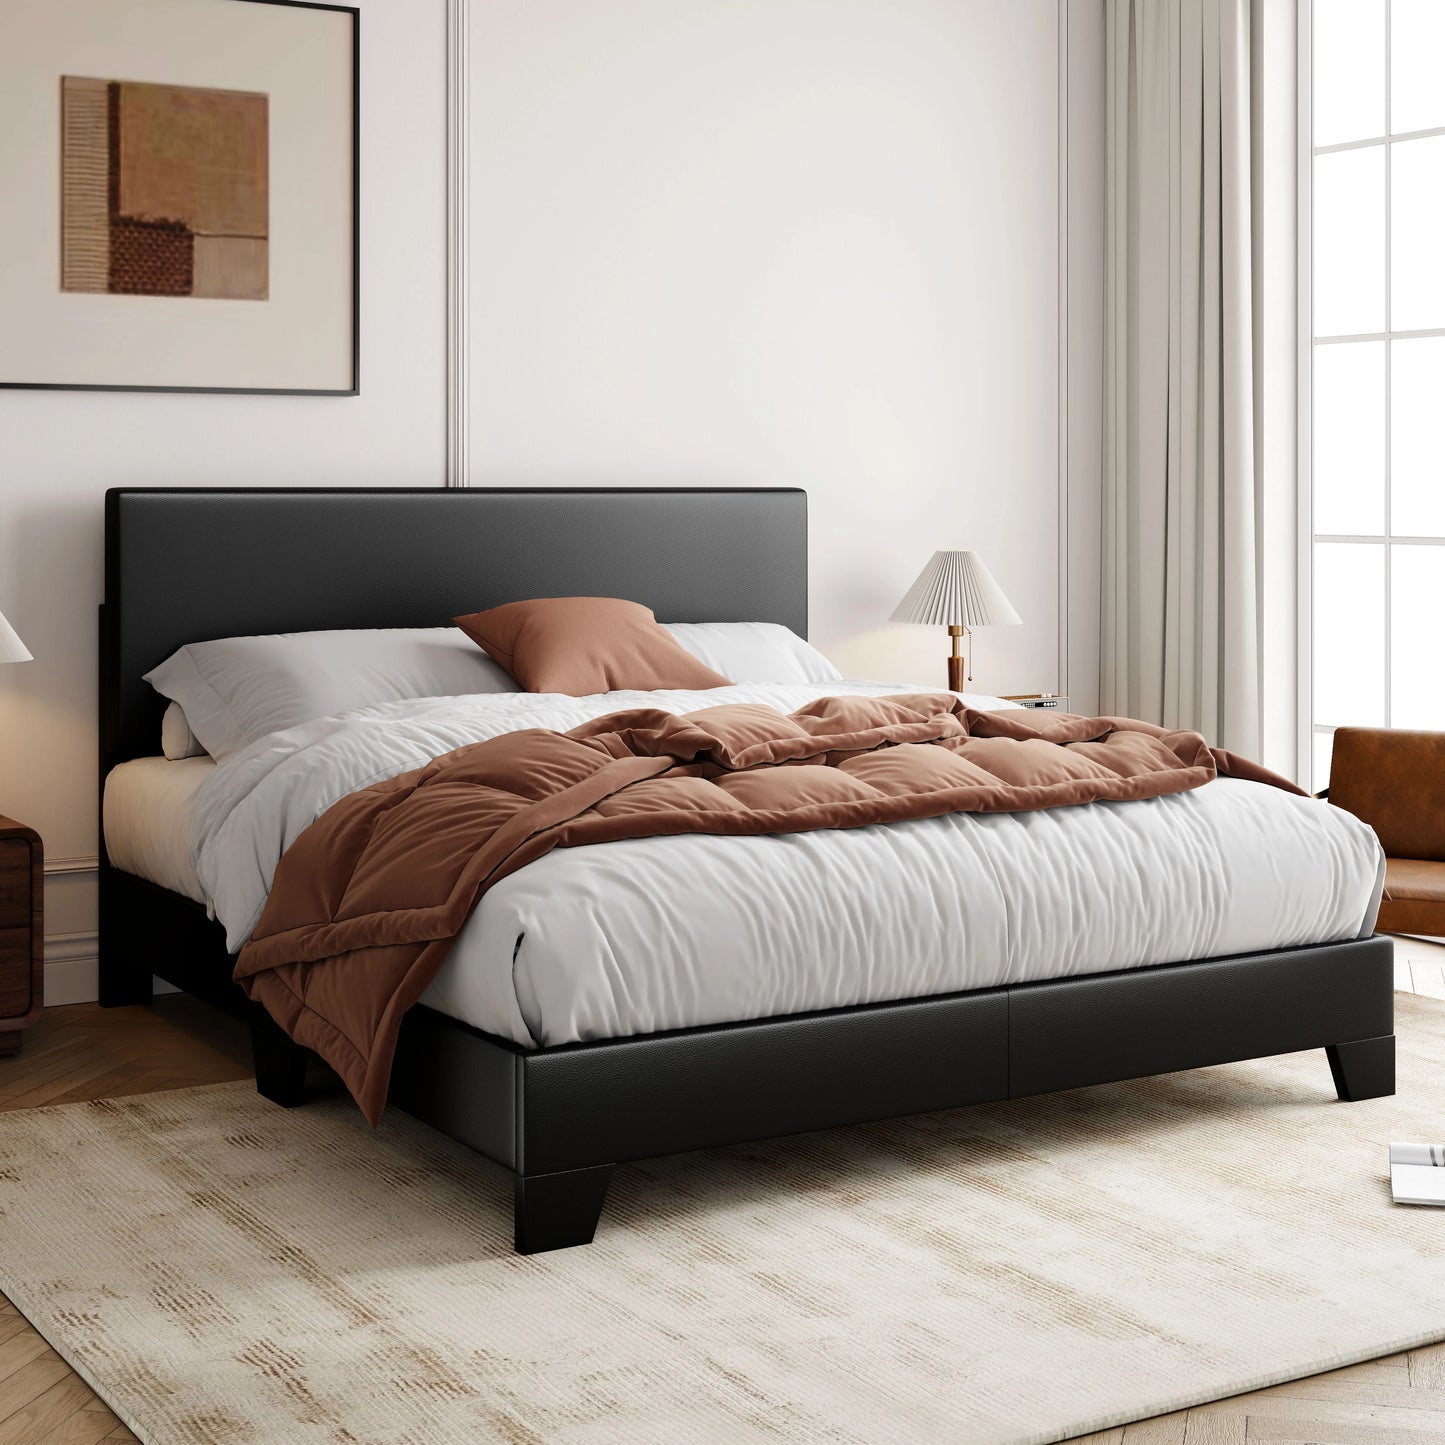 Allewie Queen Size Platform Bed Fame with Upholstered Adjustable Leather Headboard and Wood Slat Support, Black